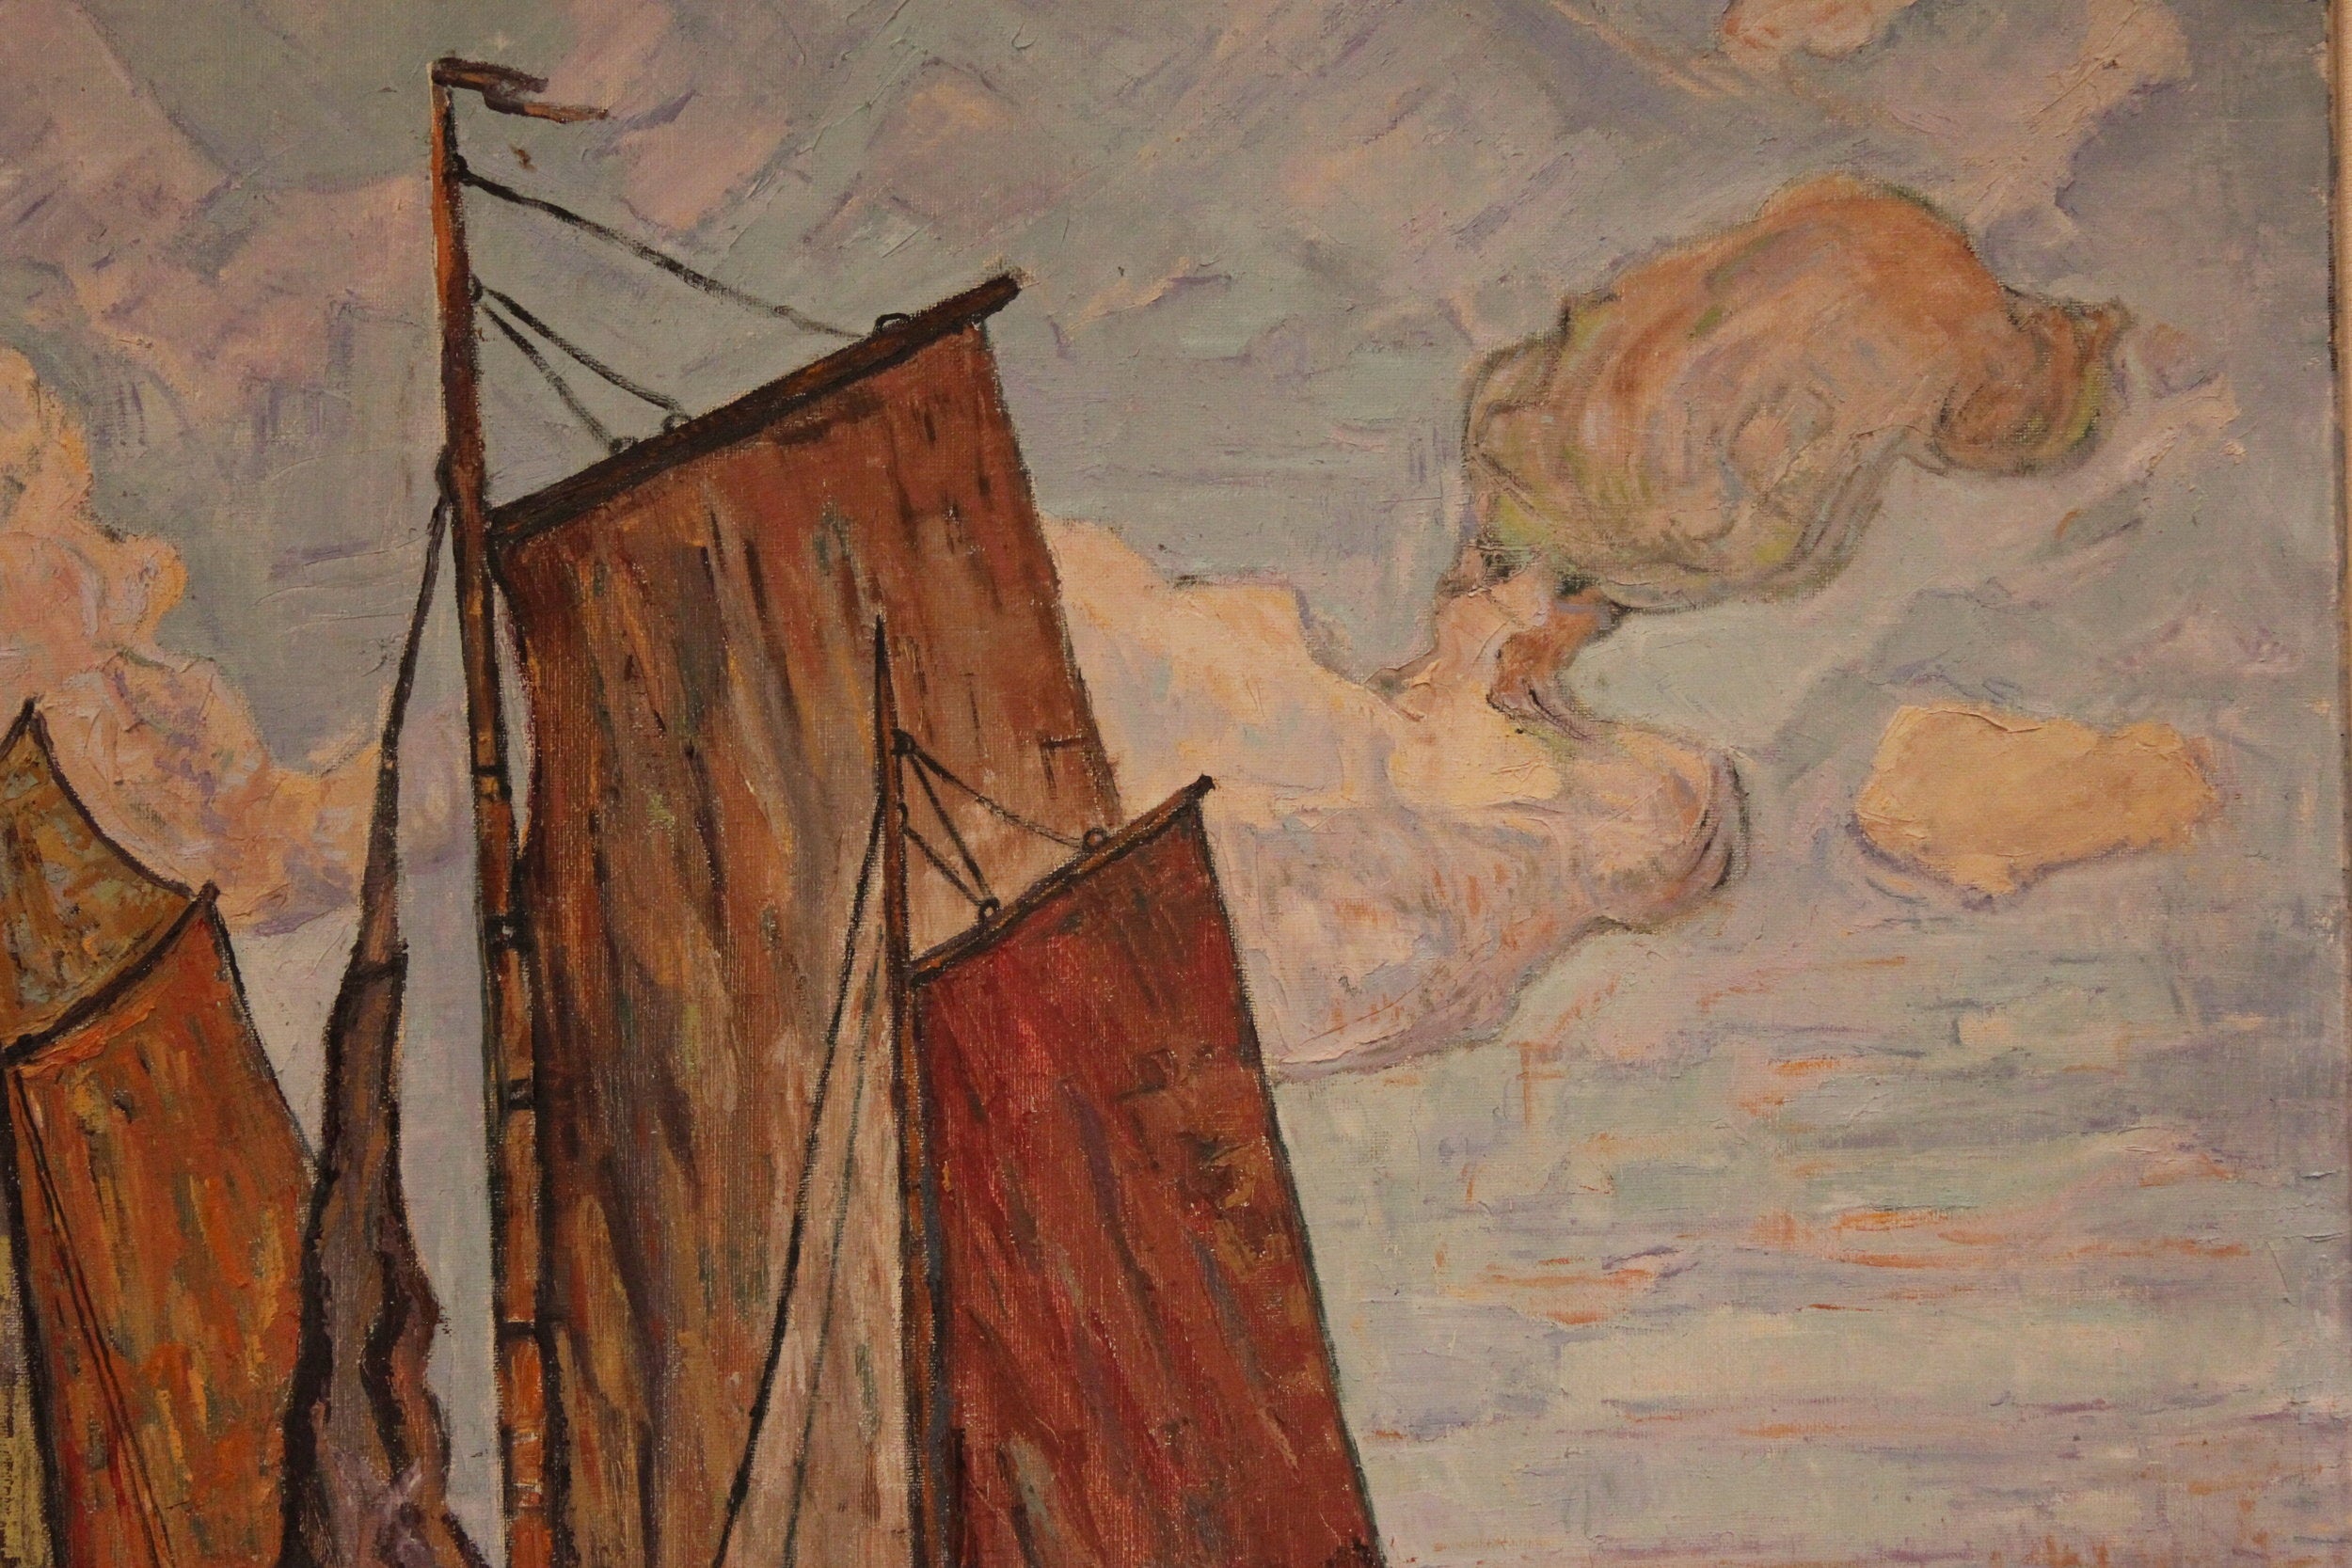 AW245 - Regah - Ships At Sea - Oil on Canvas